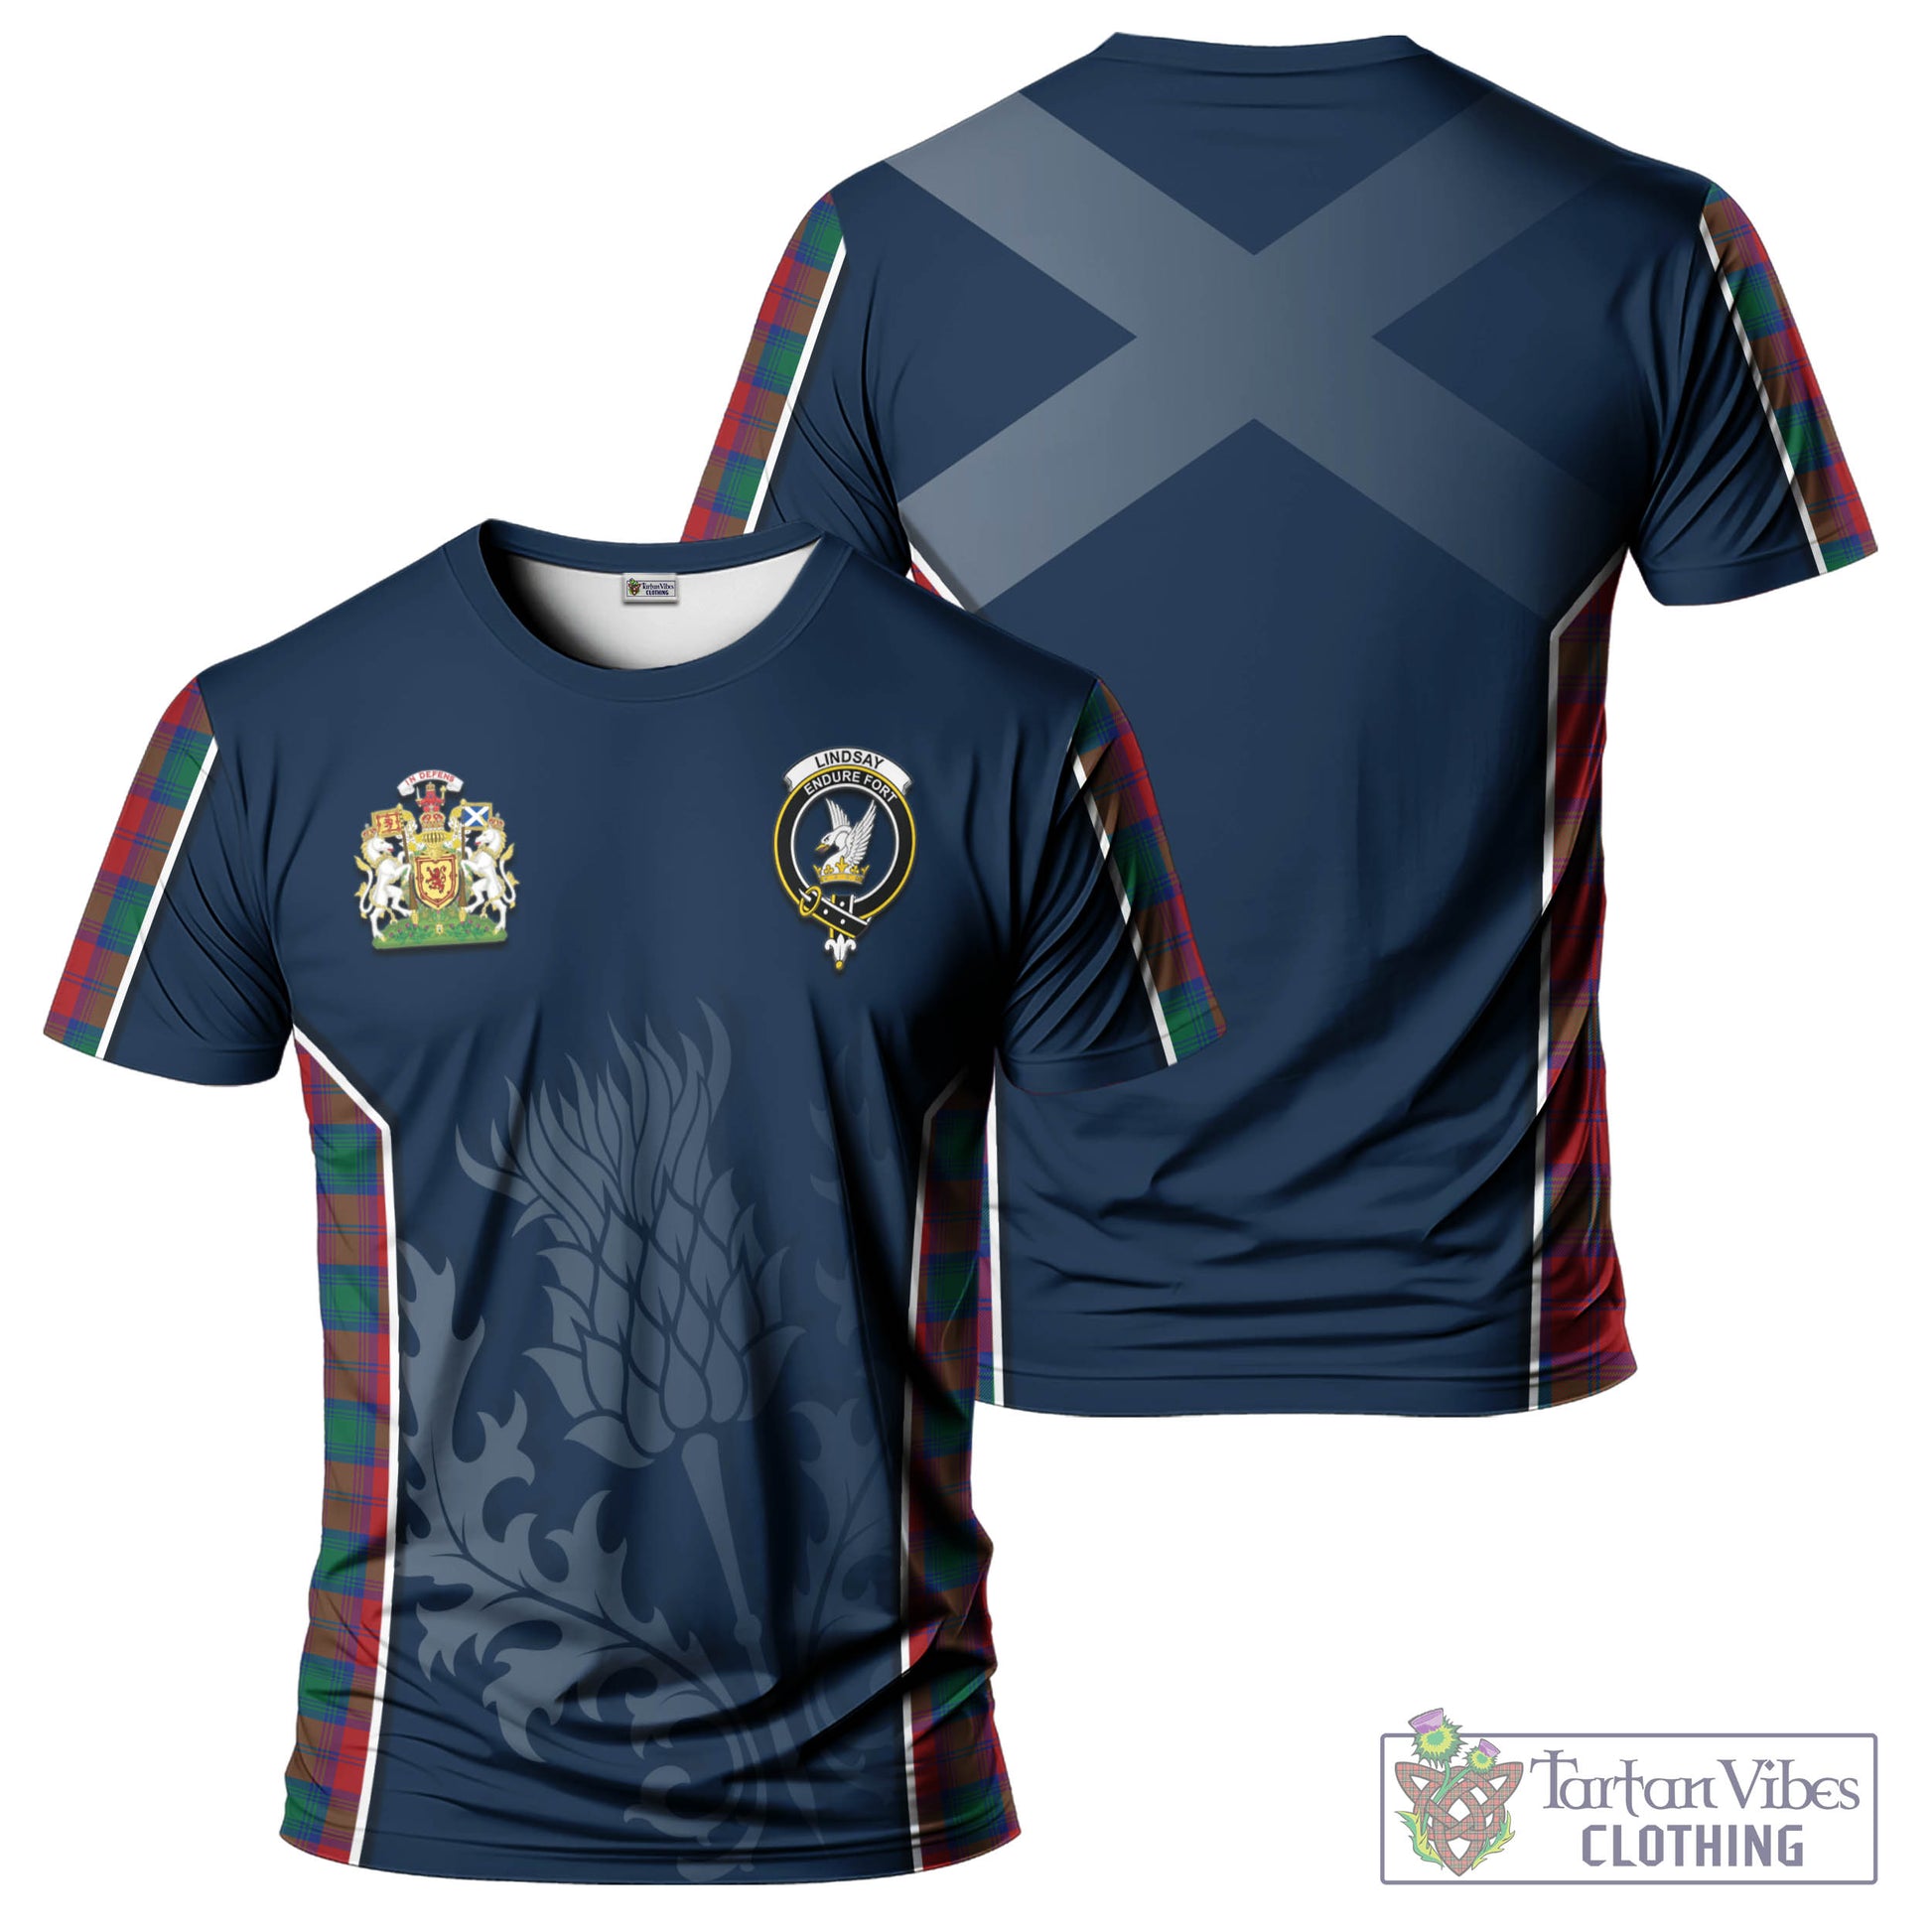 Tartan Vibes Clothing Lindsay Modern Tartan T-Shirt with Family Crest and Scottish Thistle Vibes Sport Style